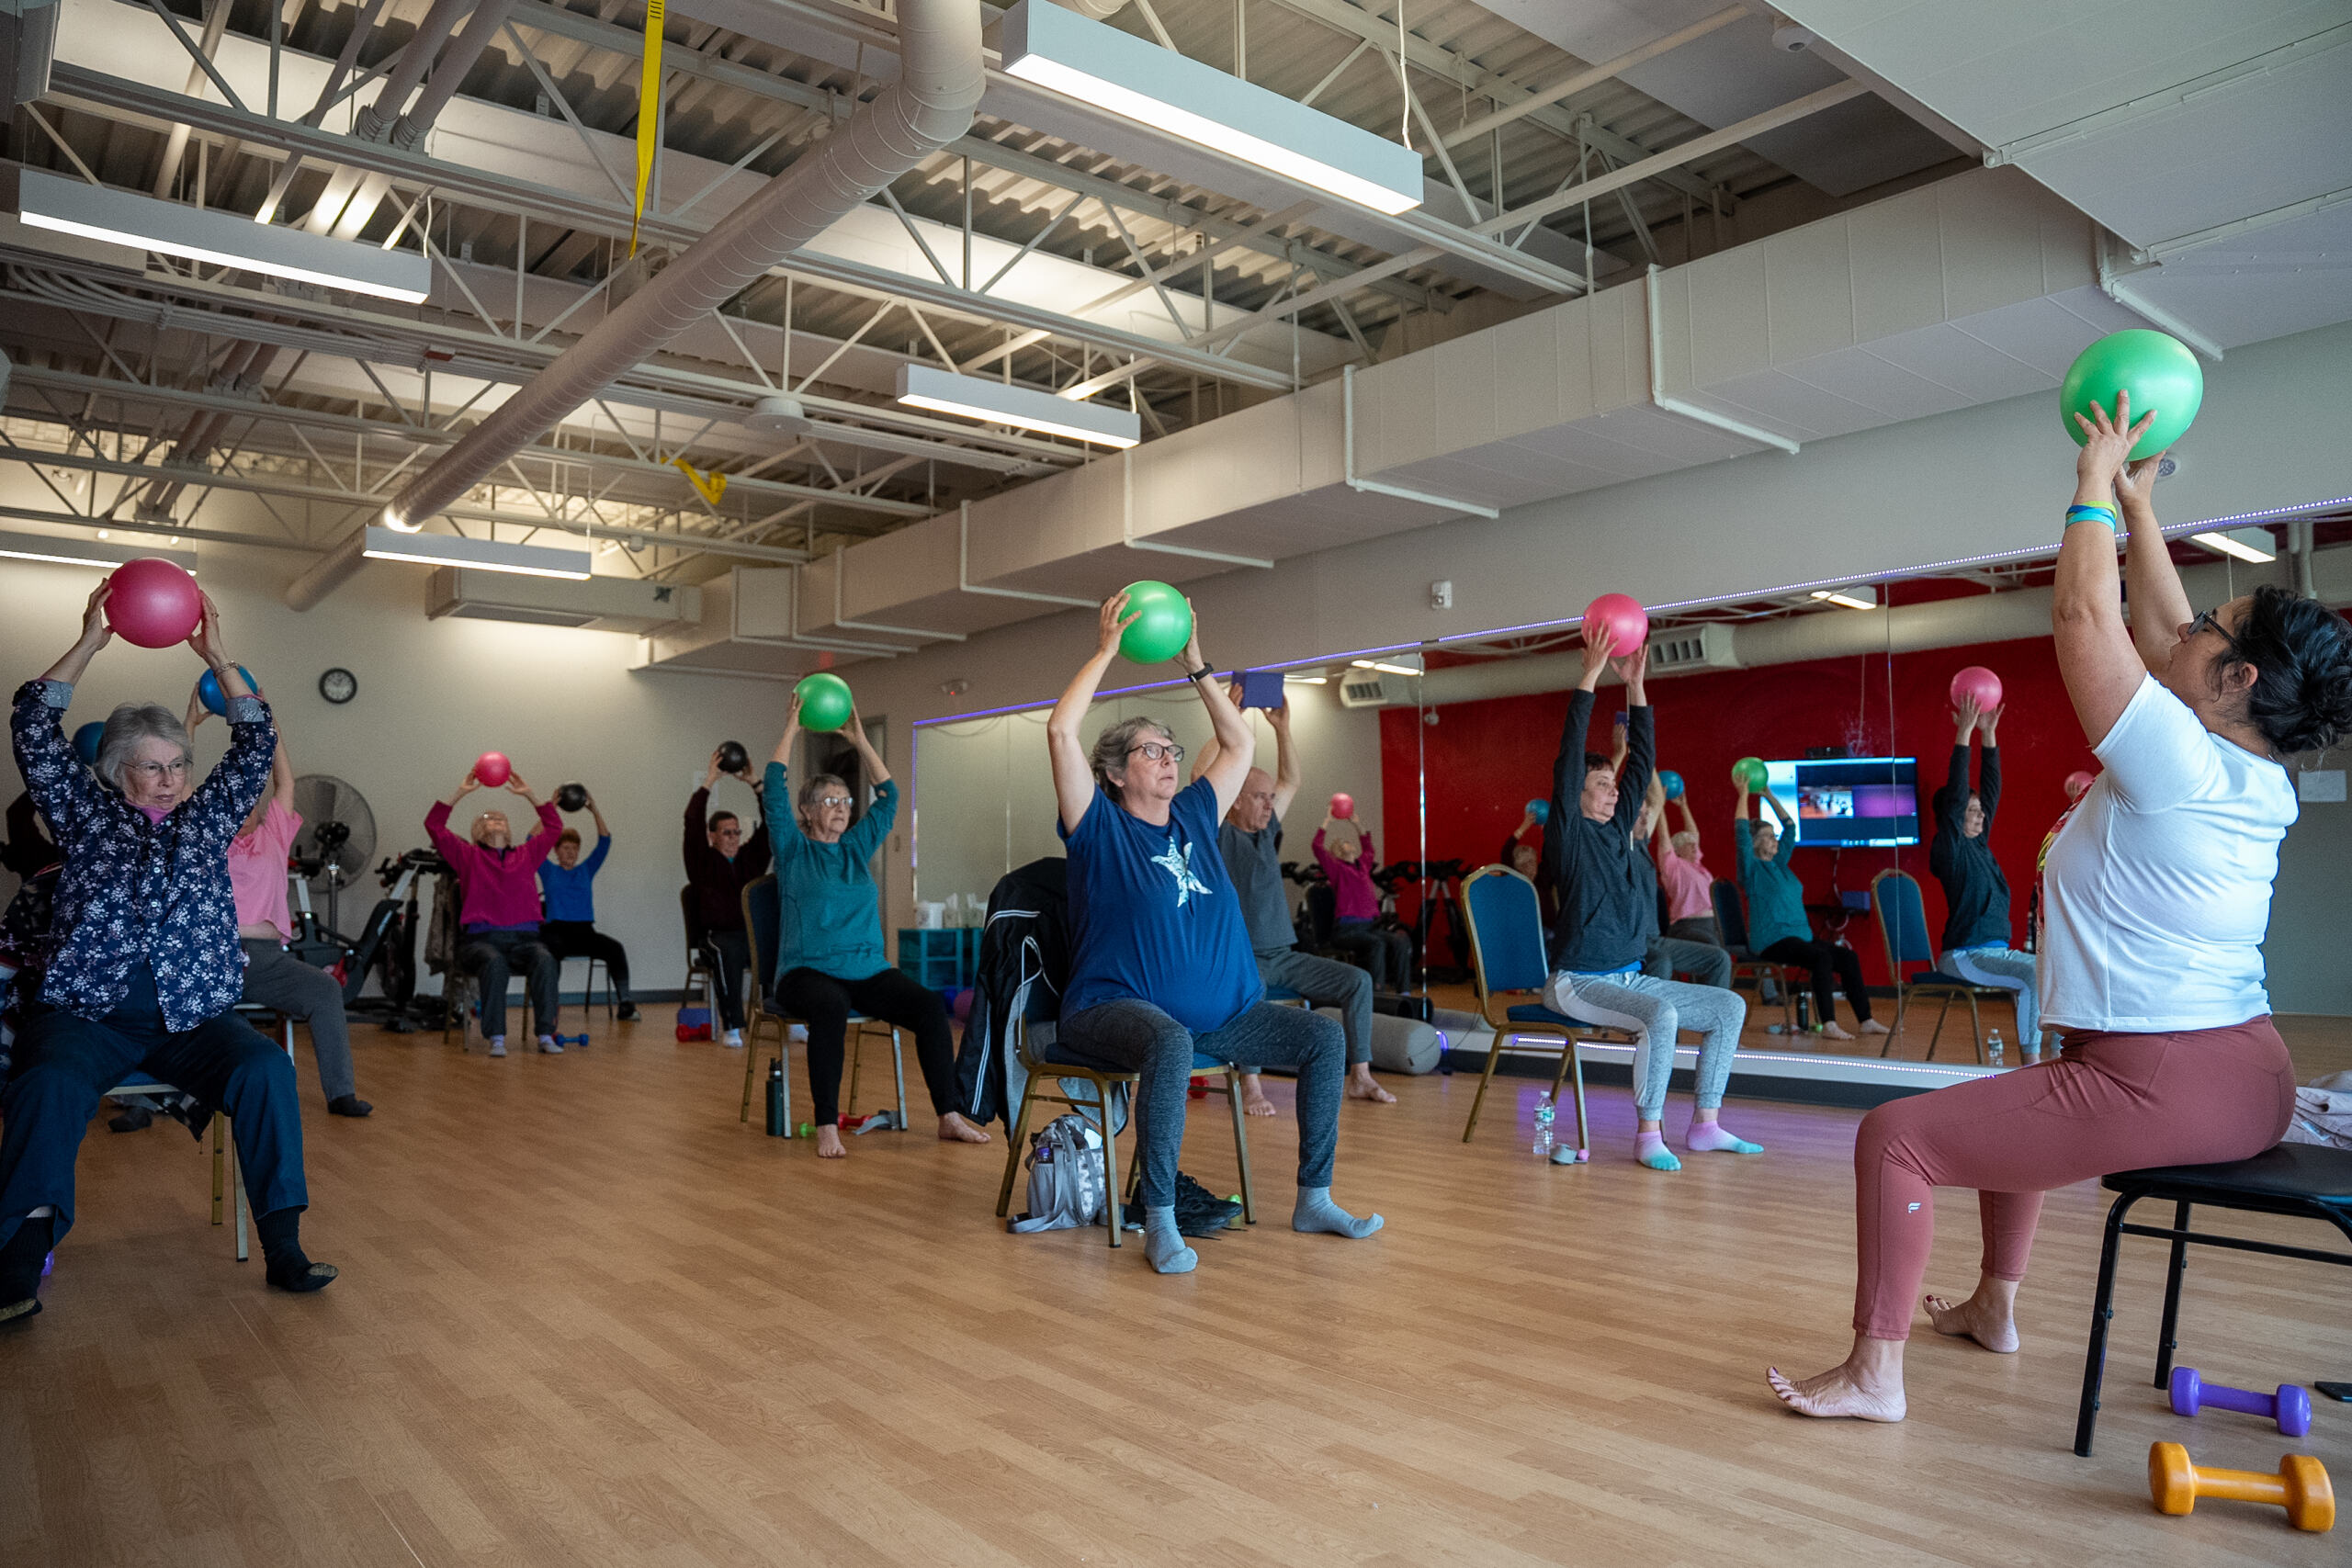 Membership - Support Healthy Lifestyles at all Ability Levels